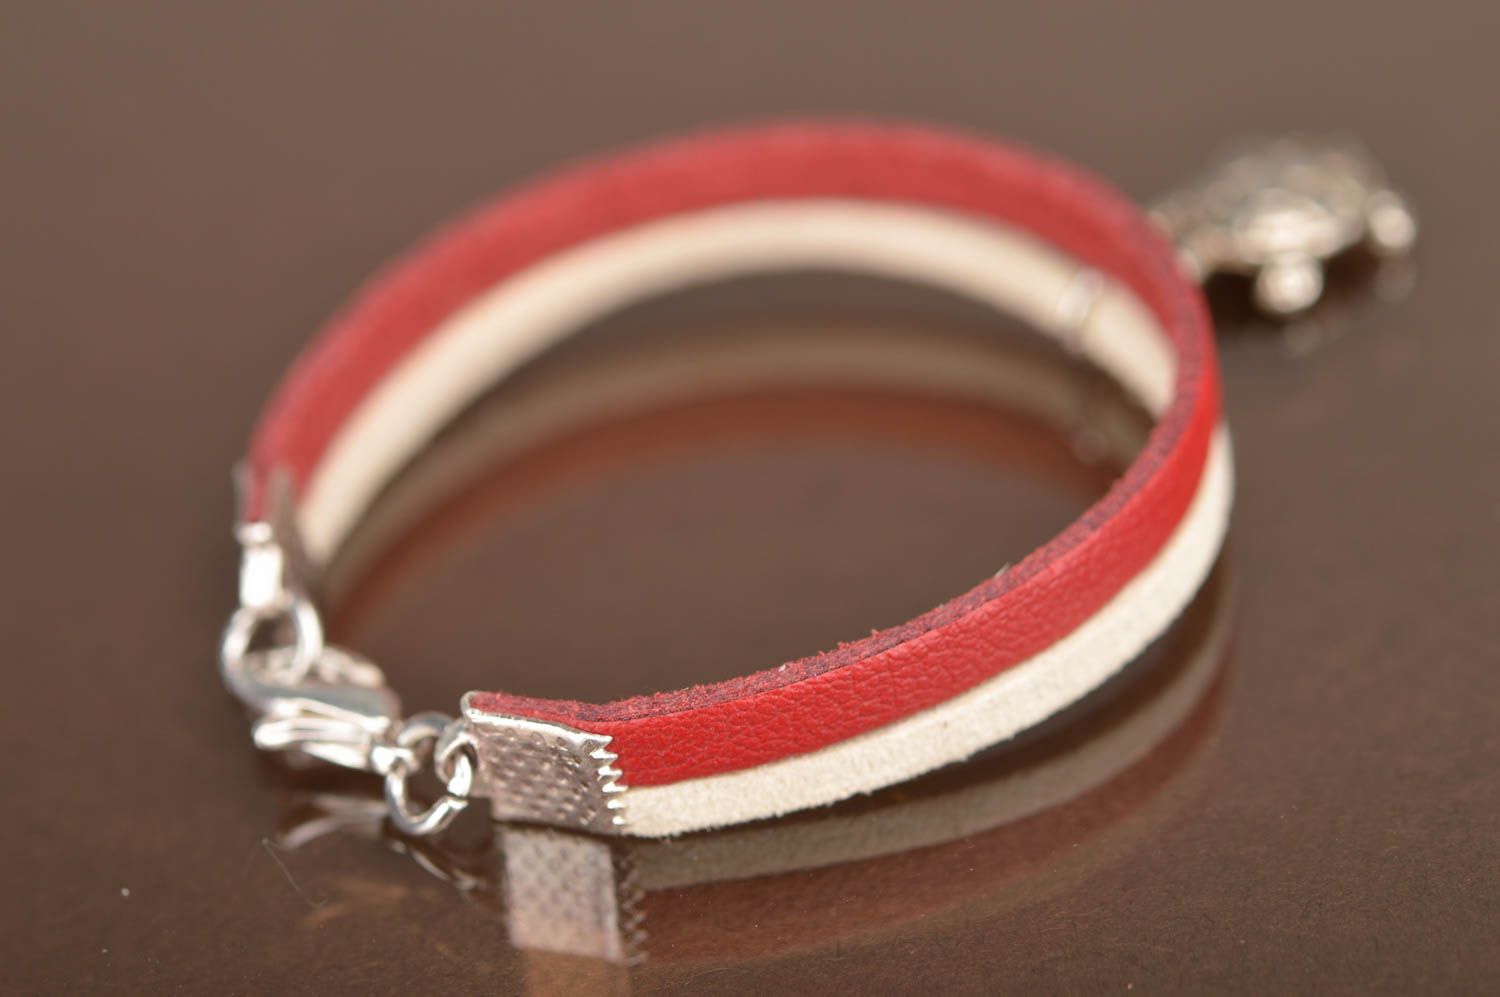 Handmade red and white leather wrist bracelet with turtle charm for kids photo 4